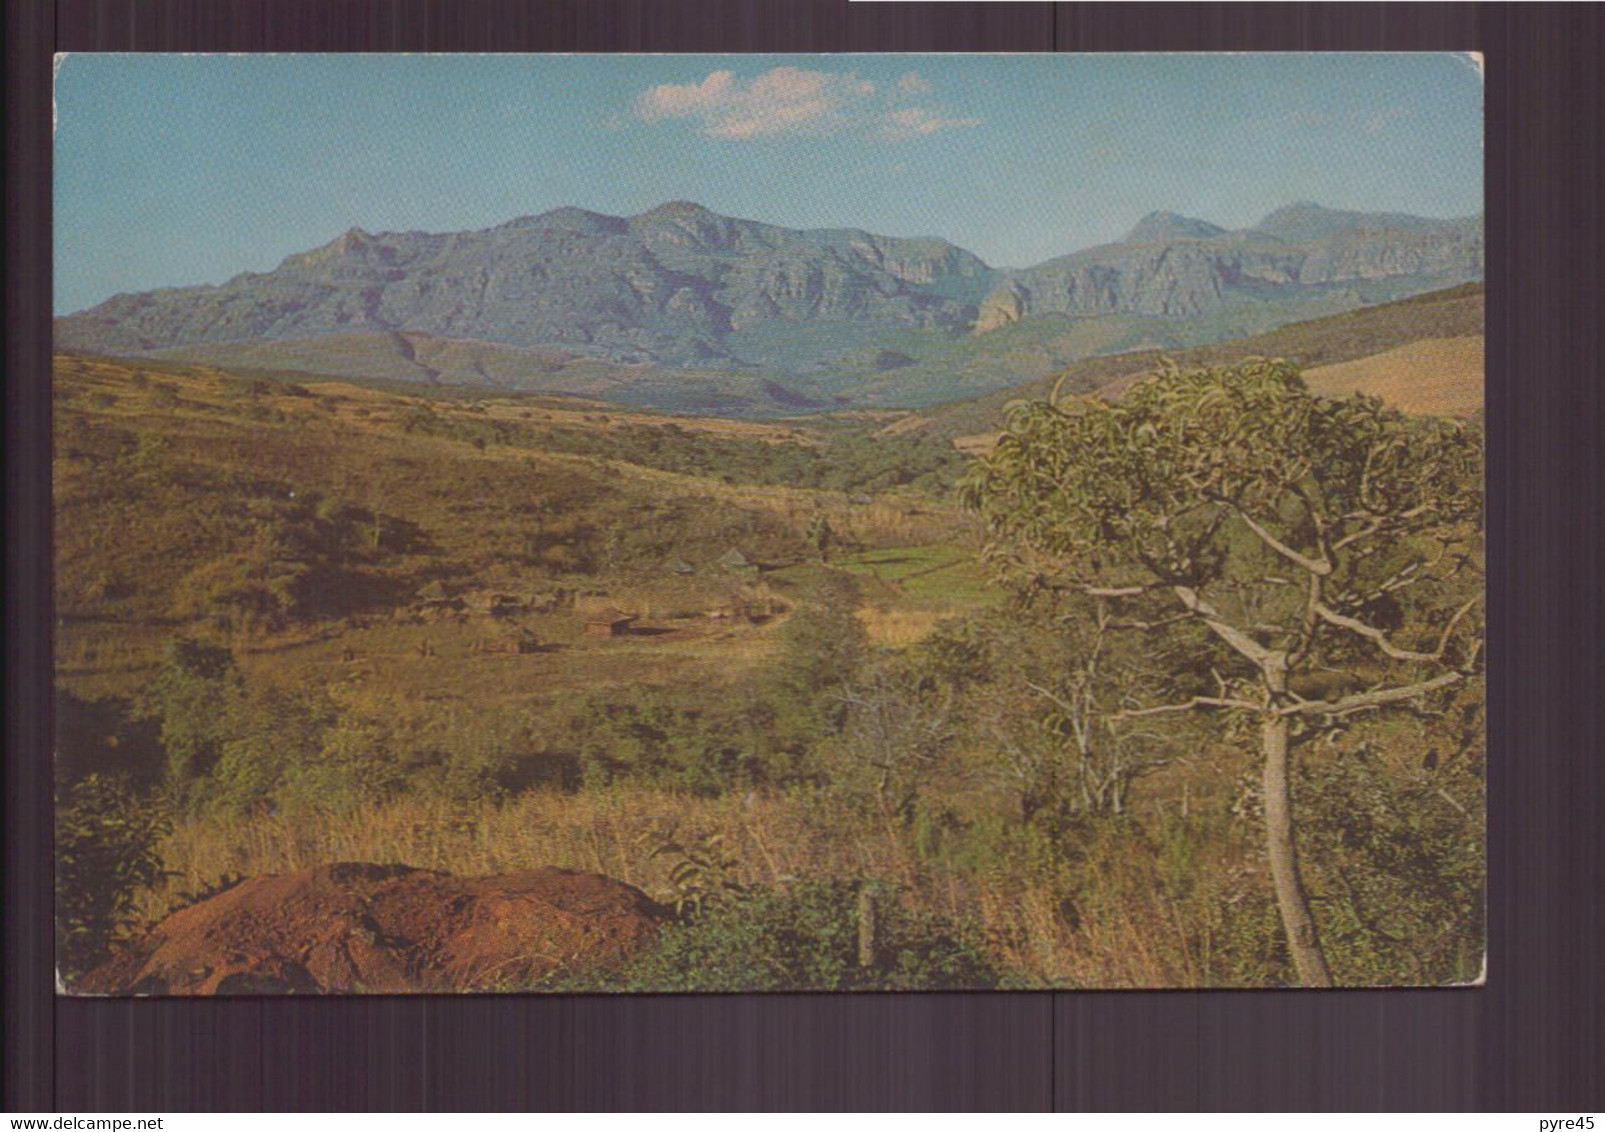 TOUR RHODESIA AND NYASALAND CHIMANIMANI MOUNTAINS MELSETTER - Unclassified